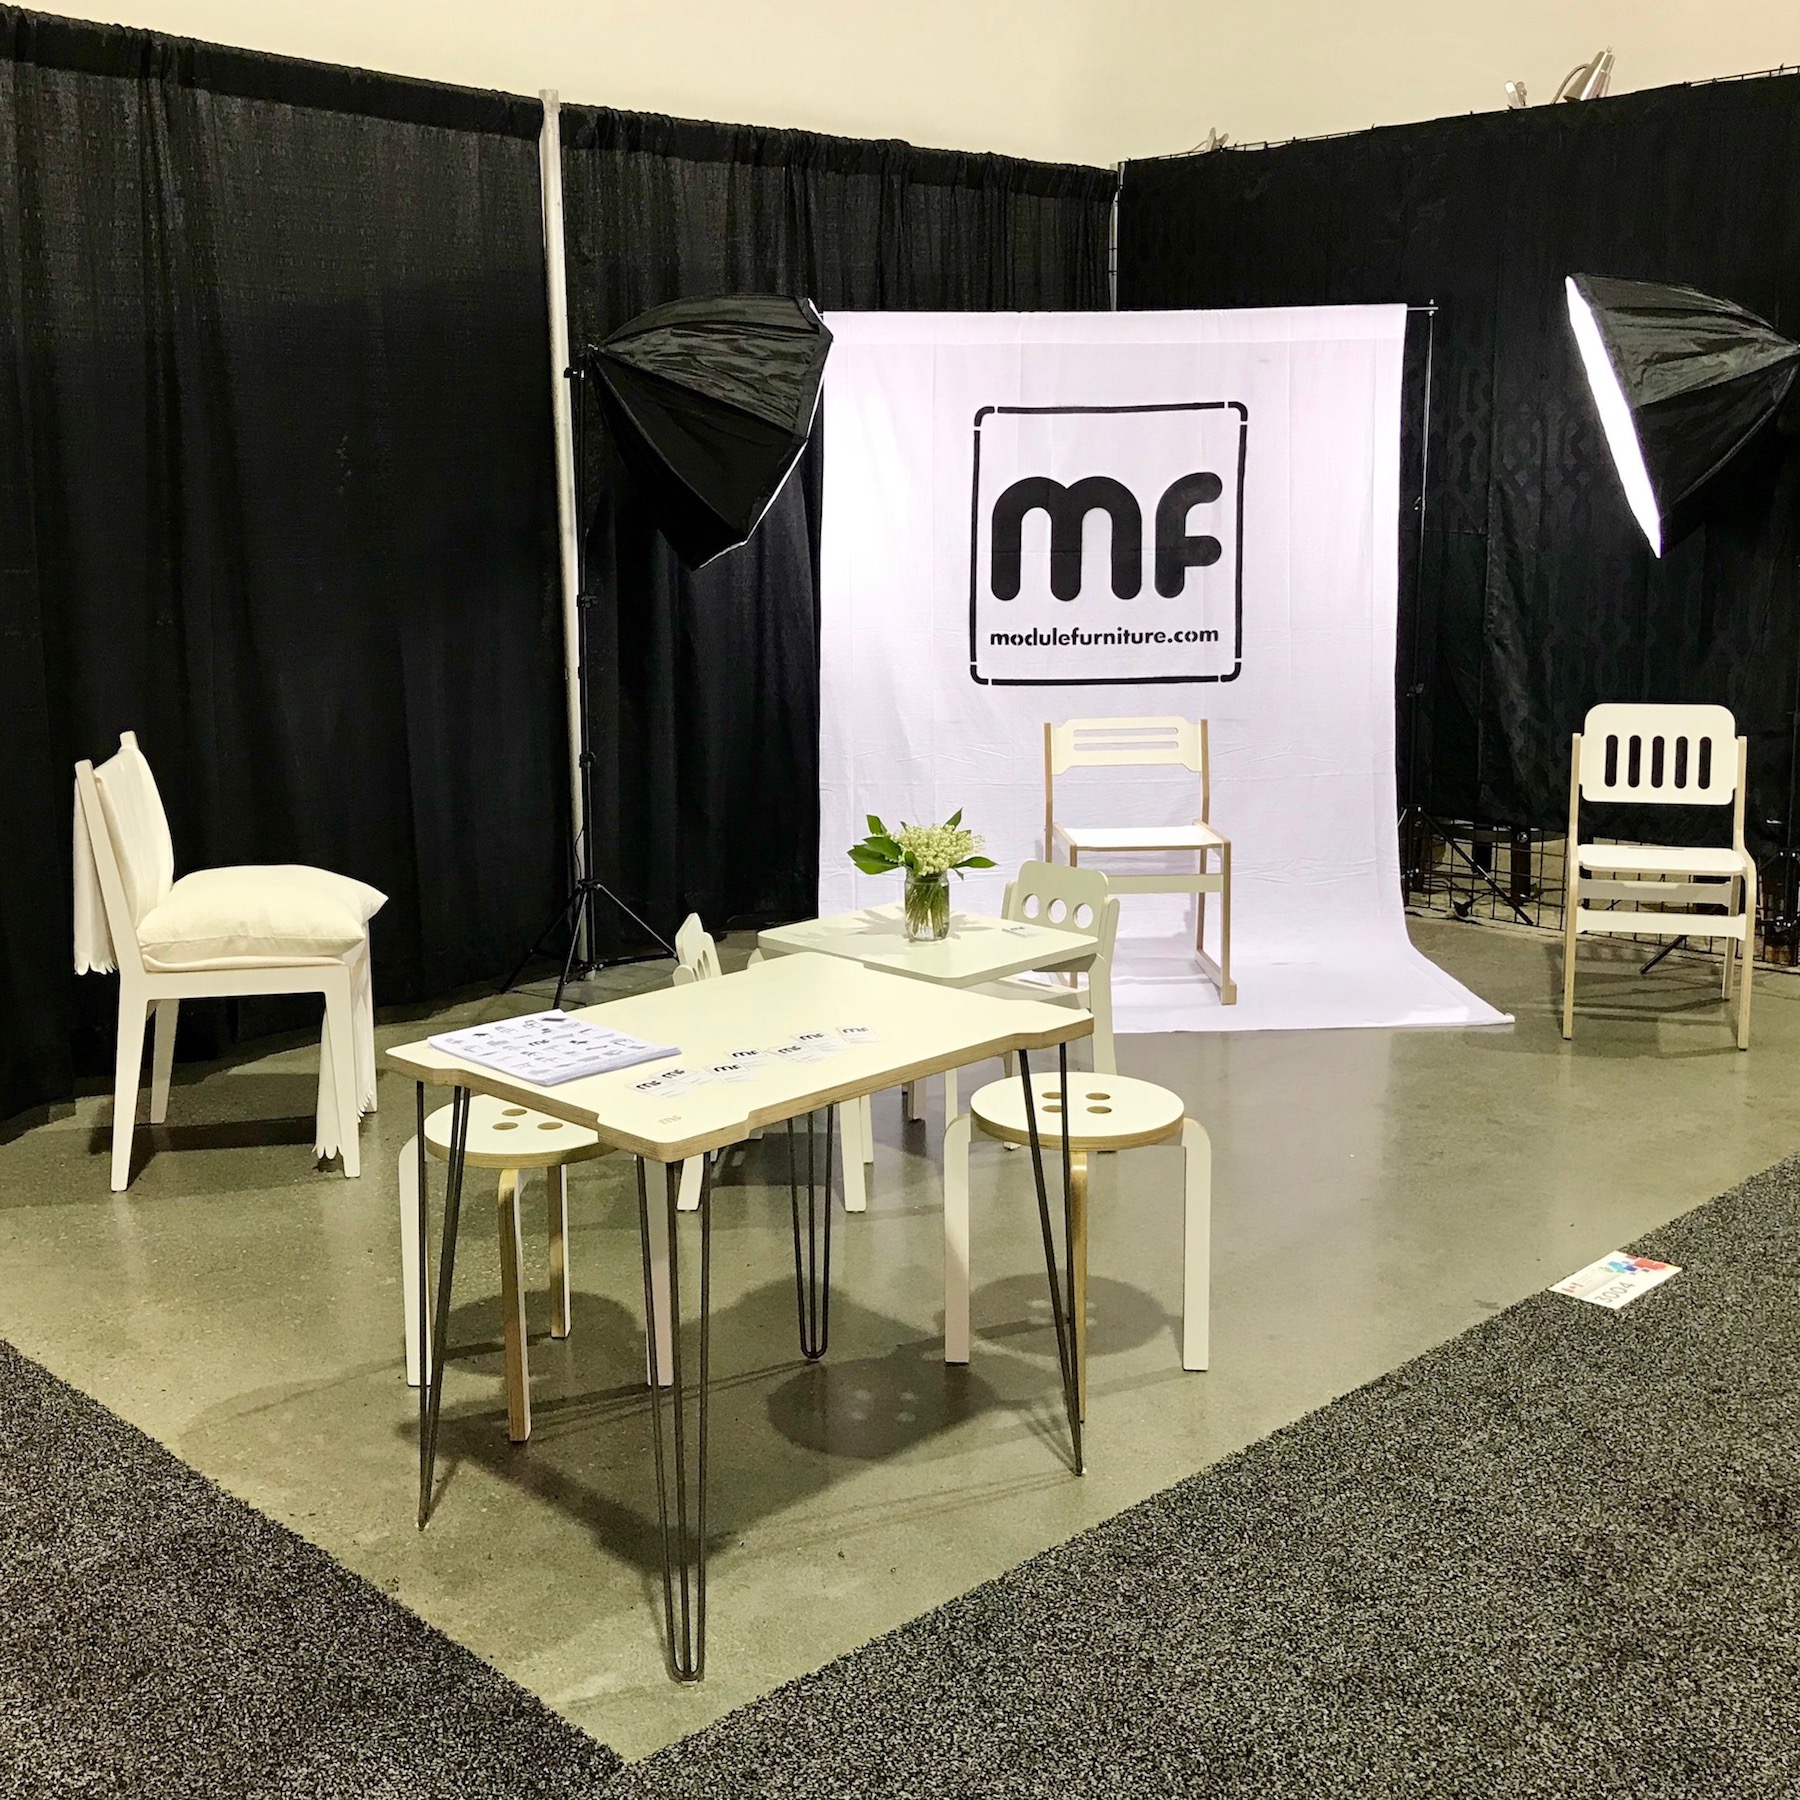 Display of Canadian Furniture Show 2018 